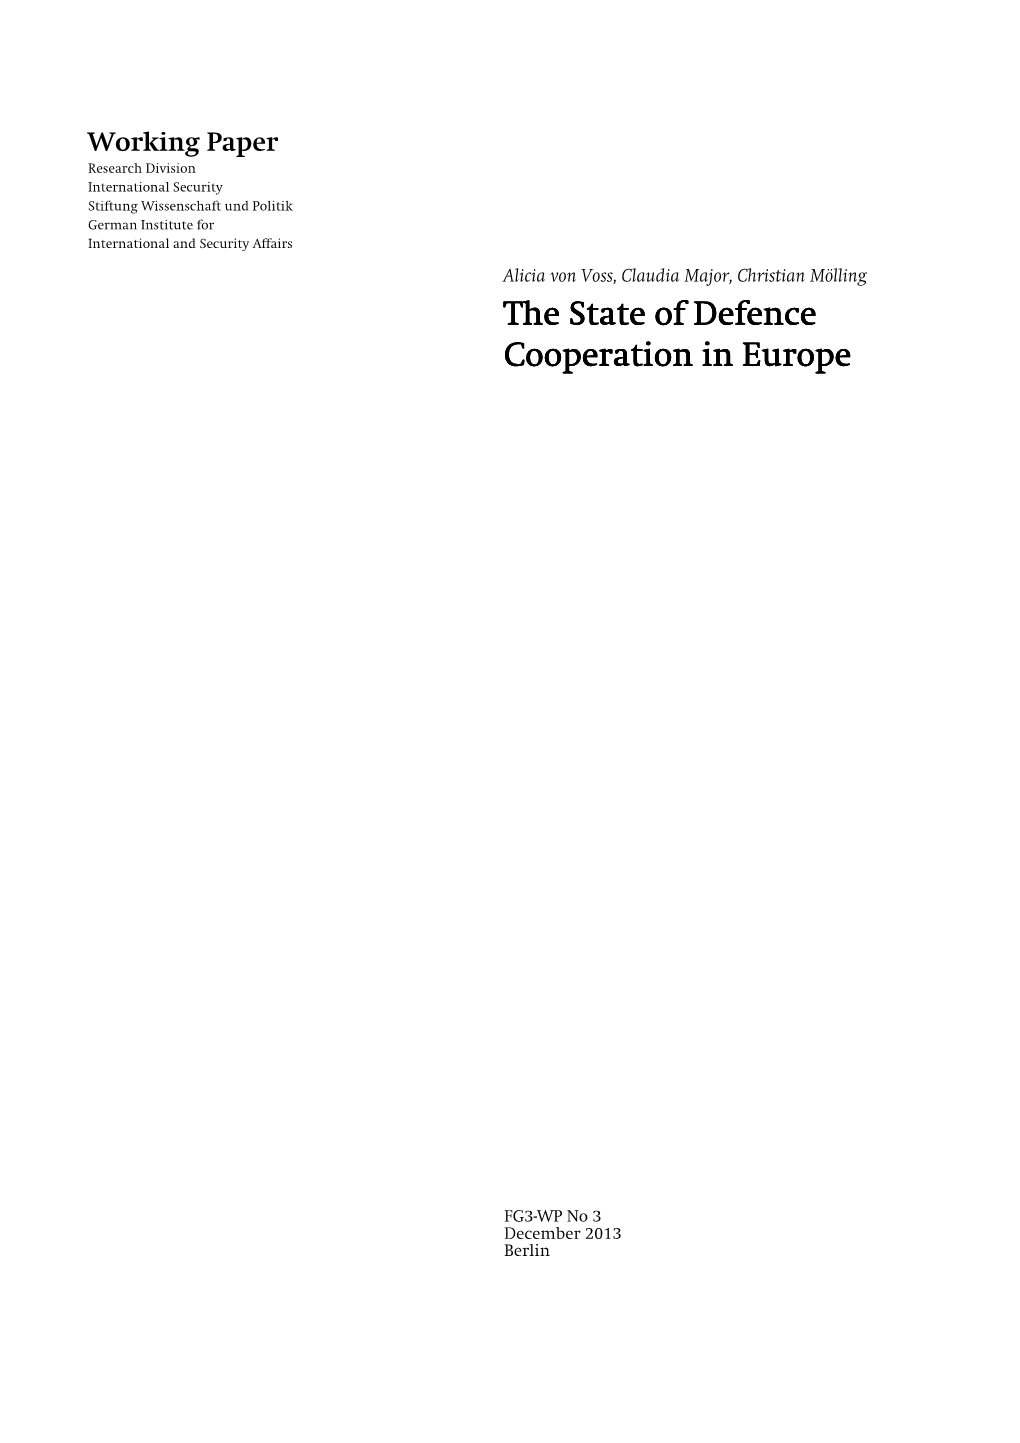 The State of Defence Cooperation in Europe